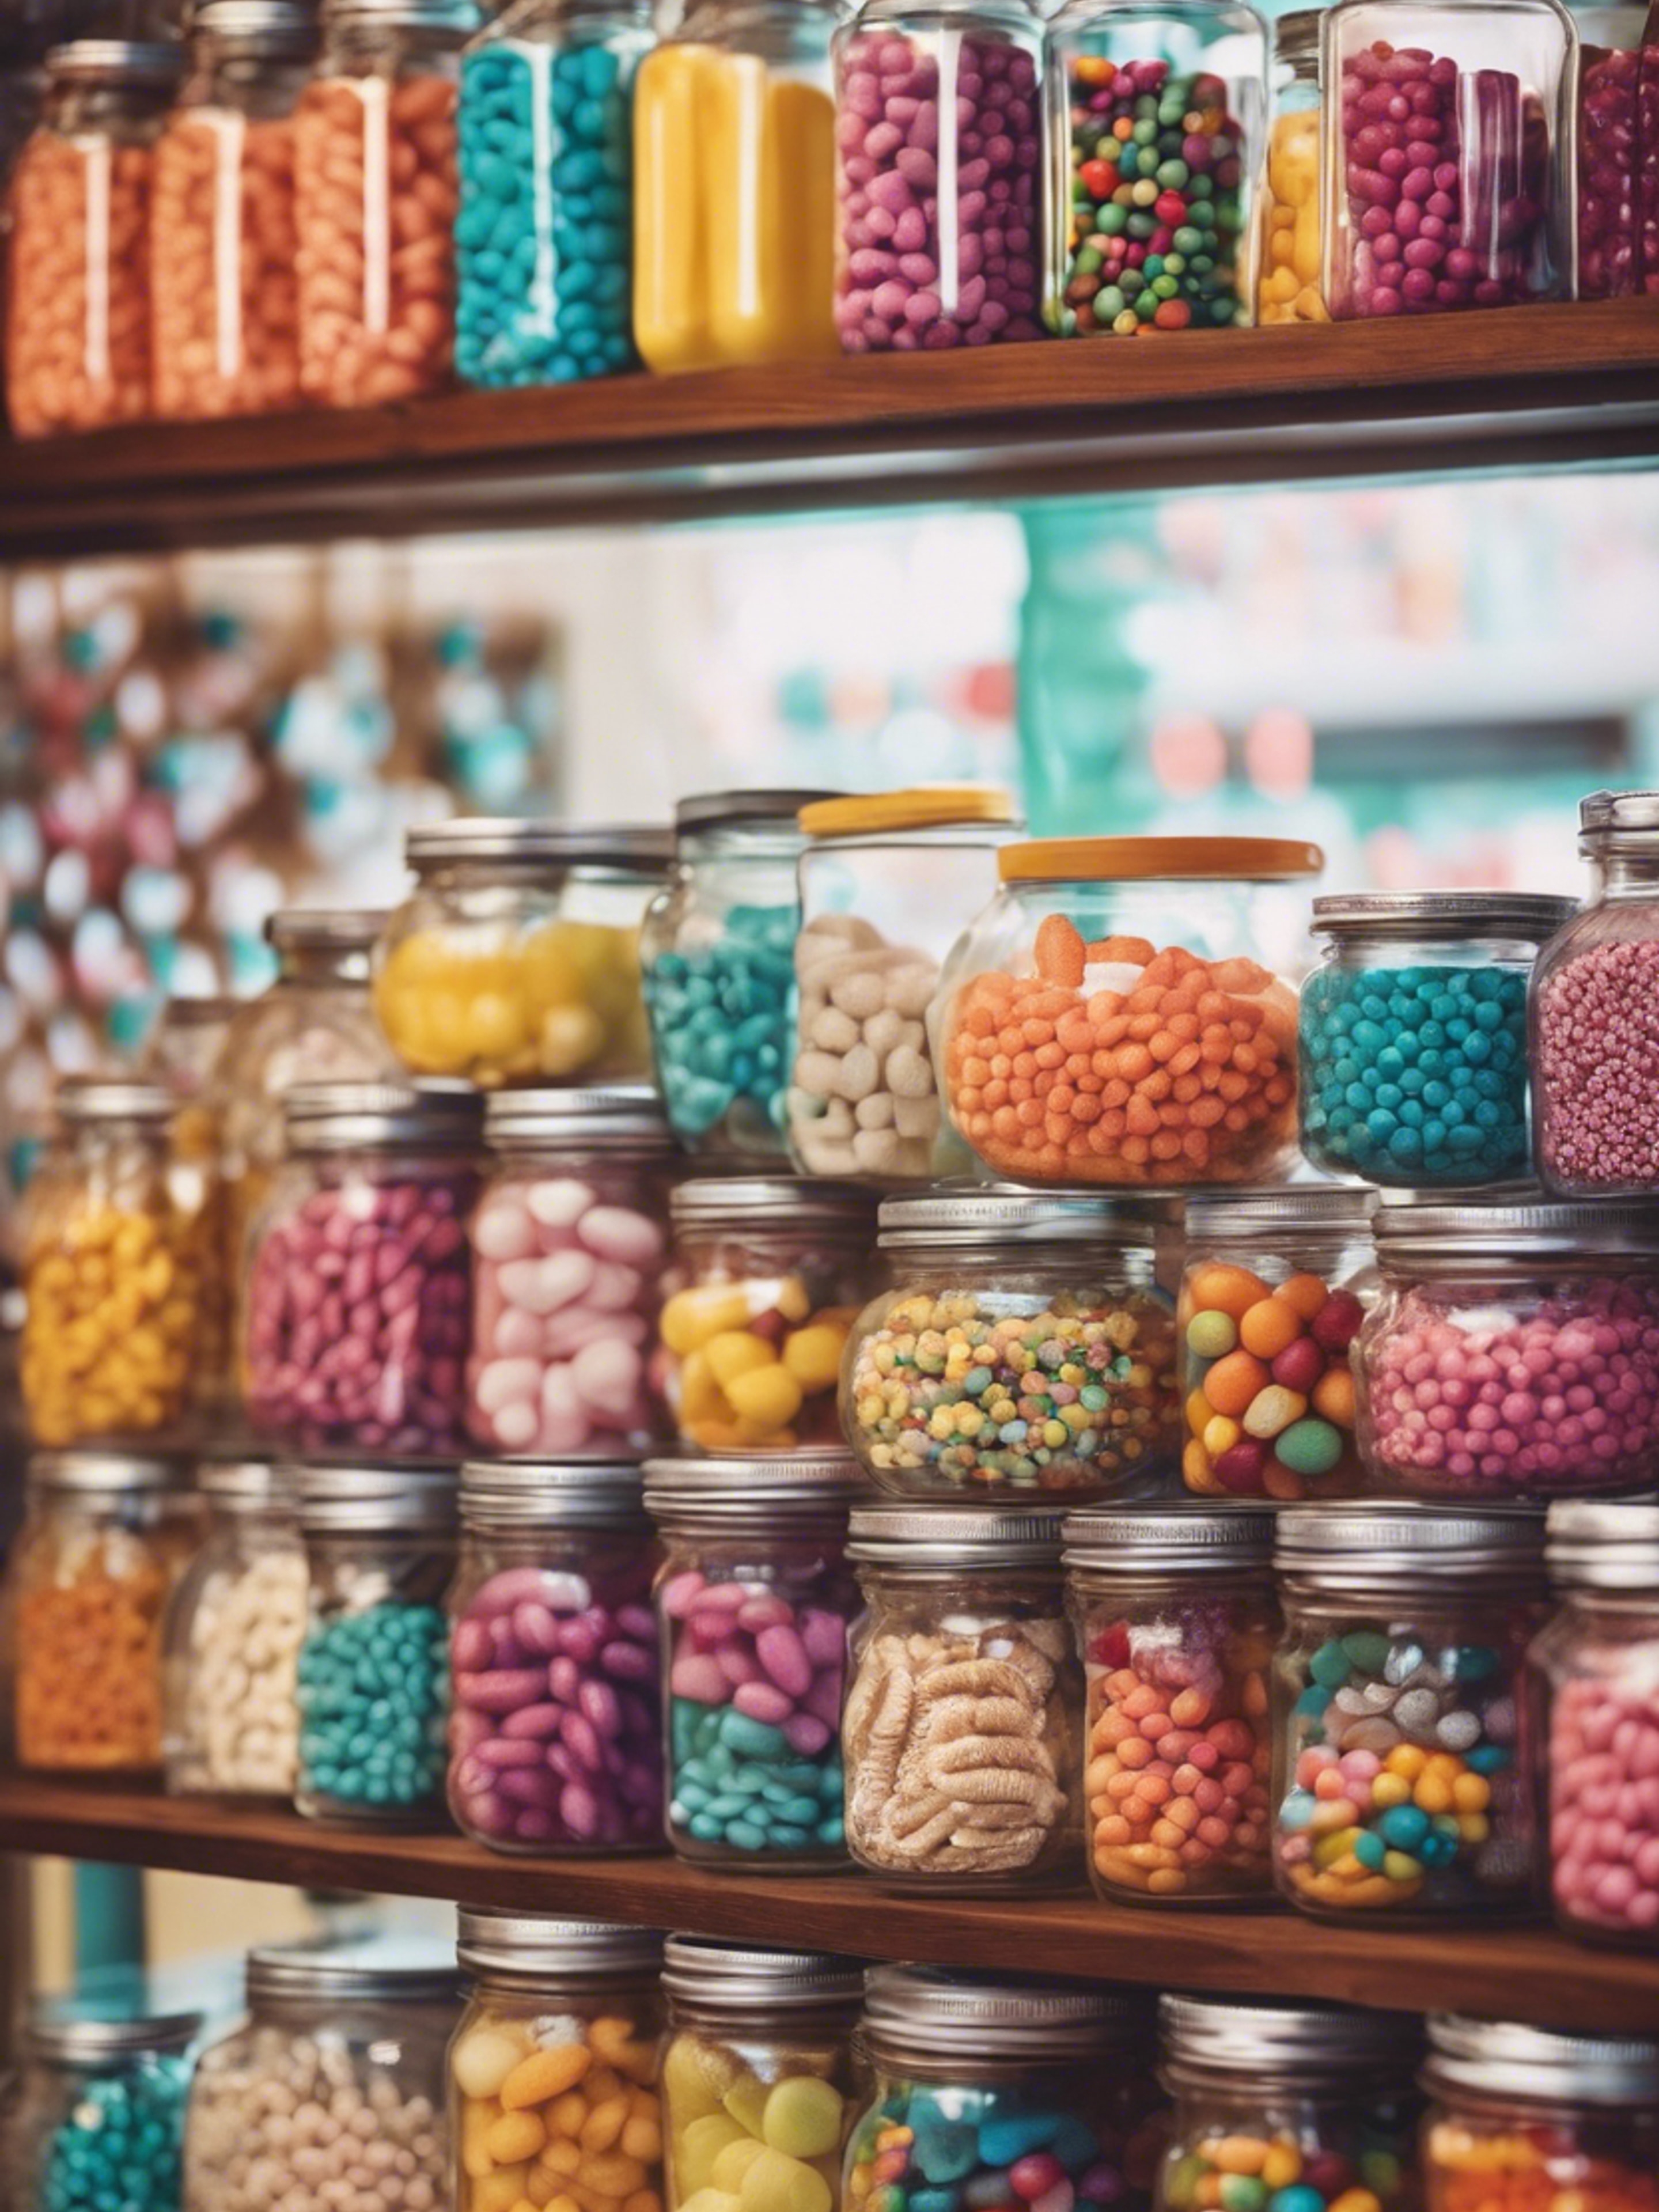 Retro candy store filled with jars of colorful treats. Wallpaper[53bdbe1ef5c6451abca1]